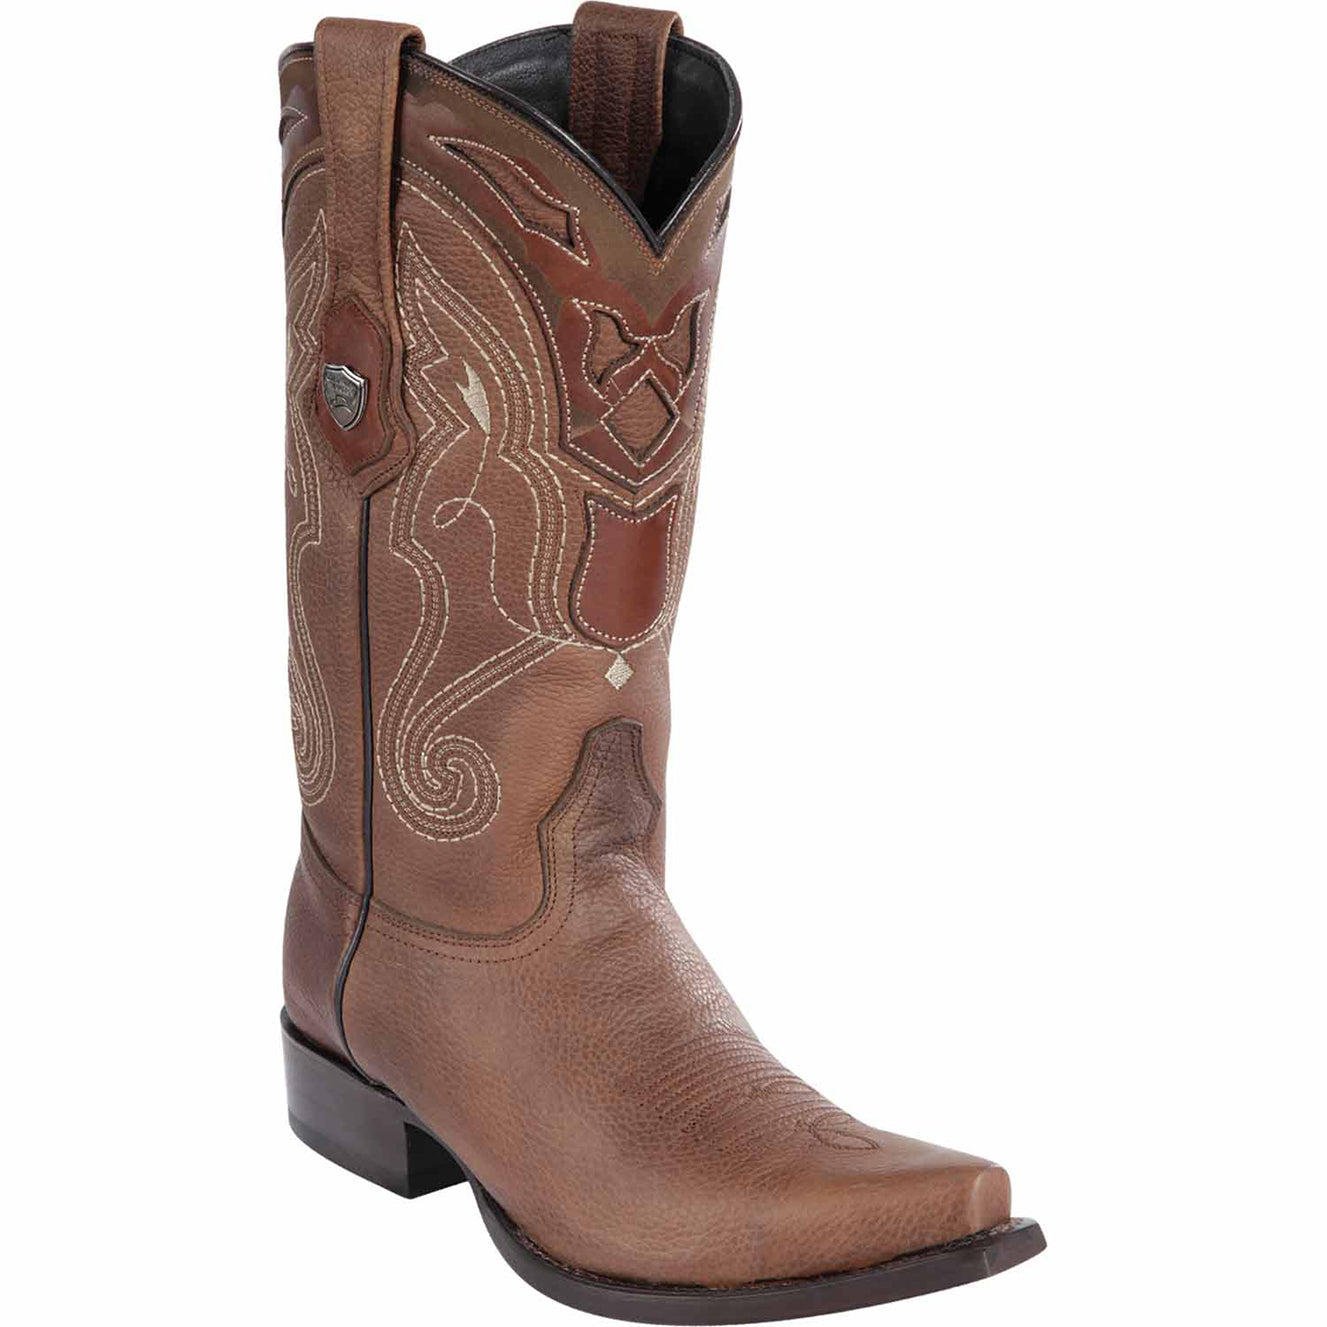 Mens Brown Cowboy Boots Snip Toe - Wild West Boots